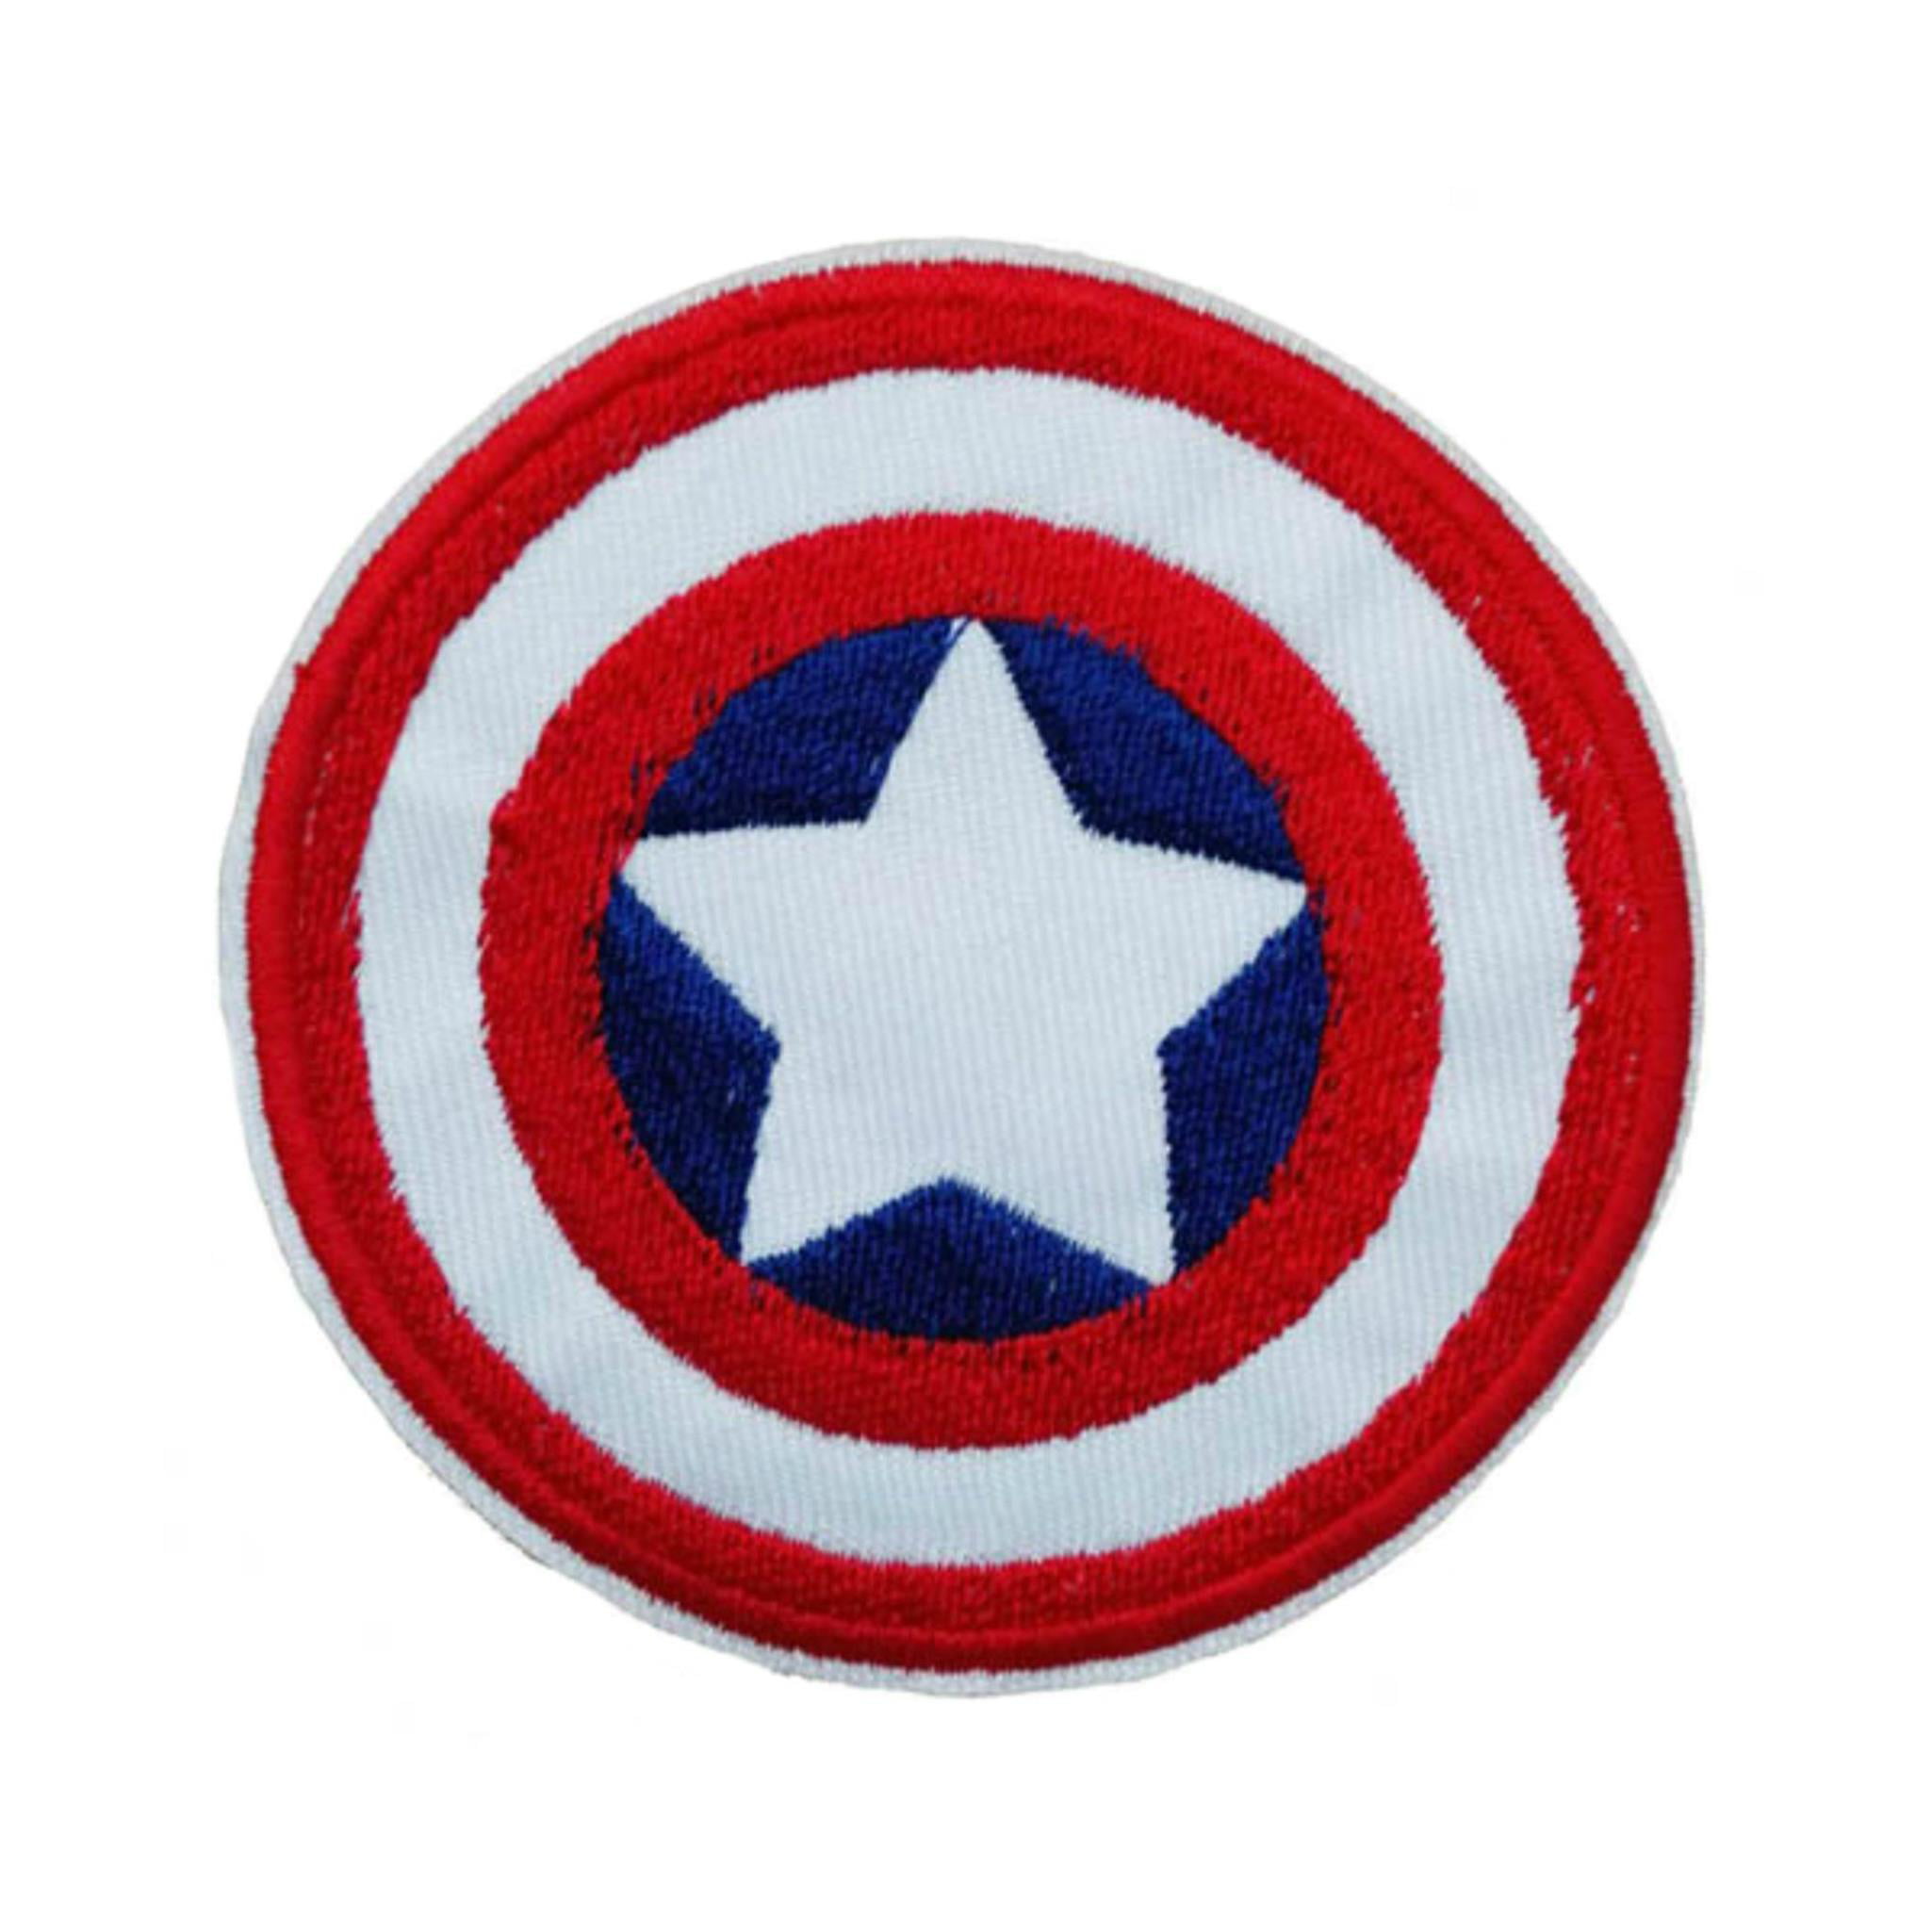 Captain America Shield Superhero Embroidered Iron or sew on Patch/Applique 3" 